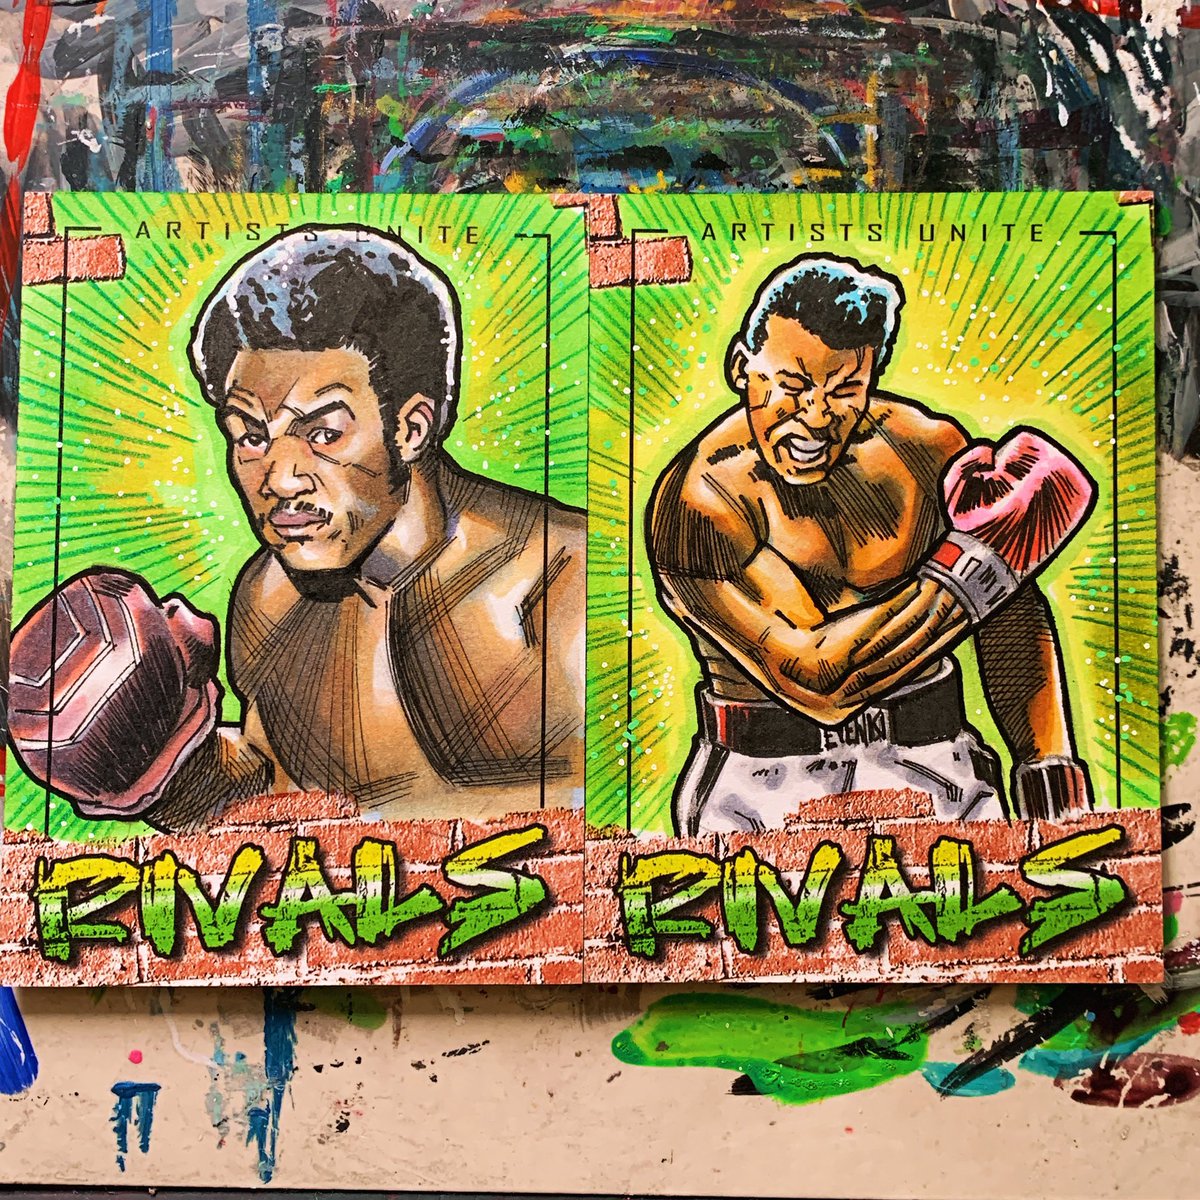 Drew Muhammad Ali & George Foreman on a couple of sketch cards for fun the other day. 

#boxing #sportsart #tradingcards